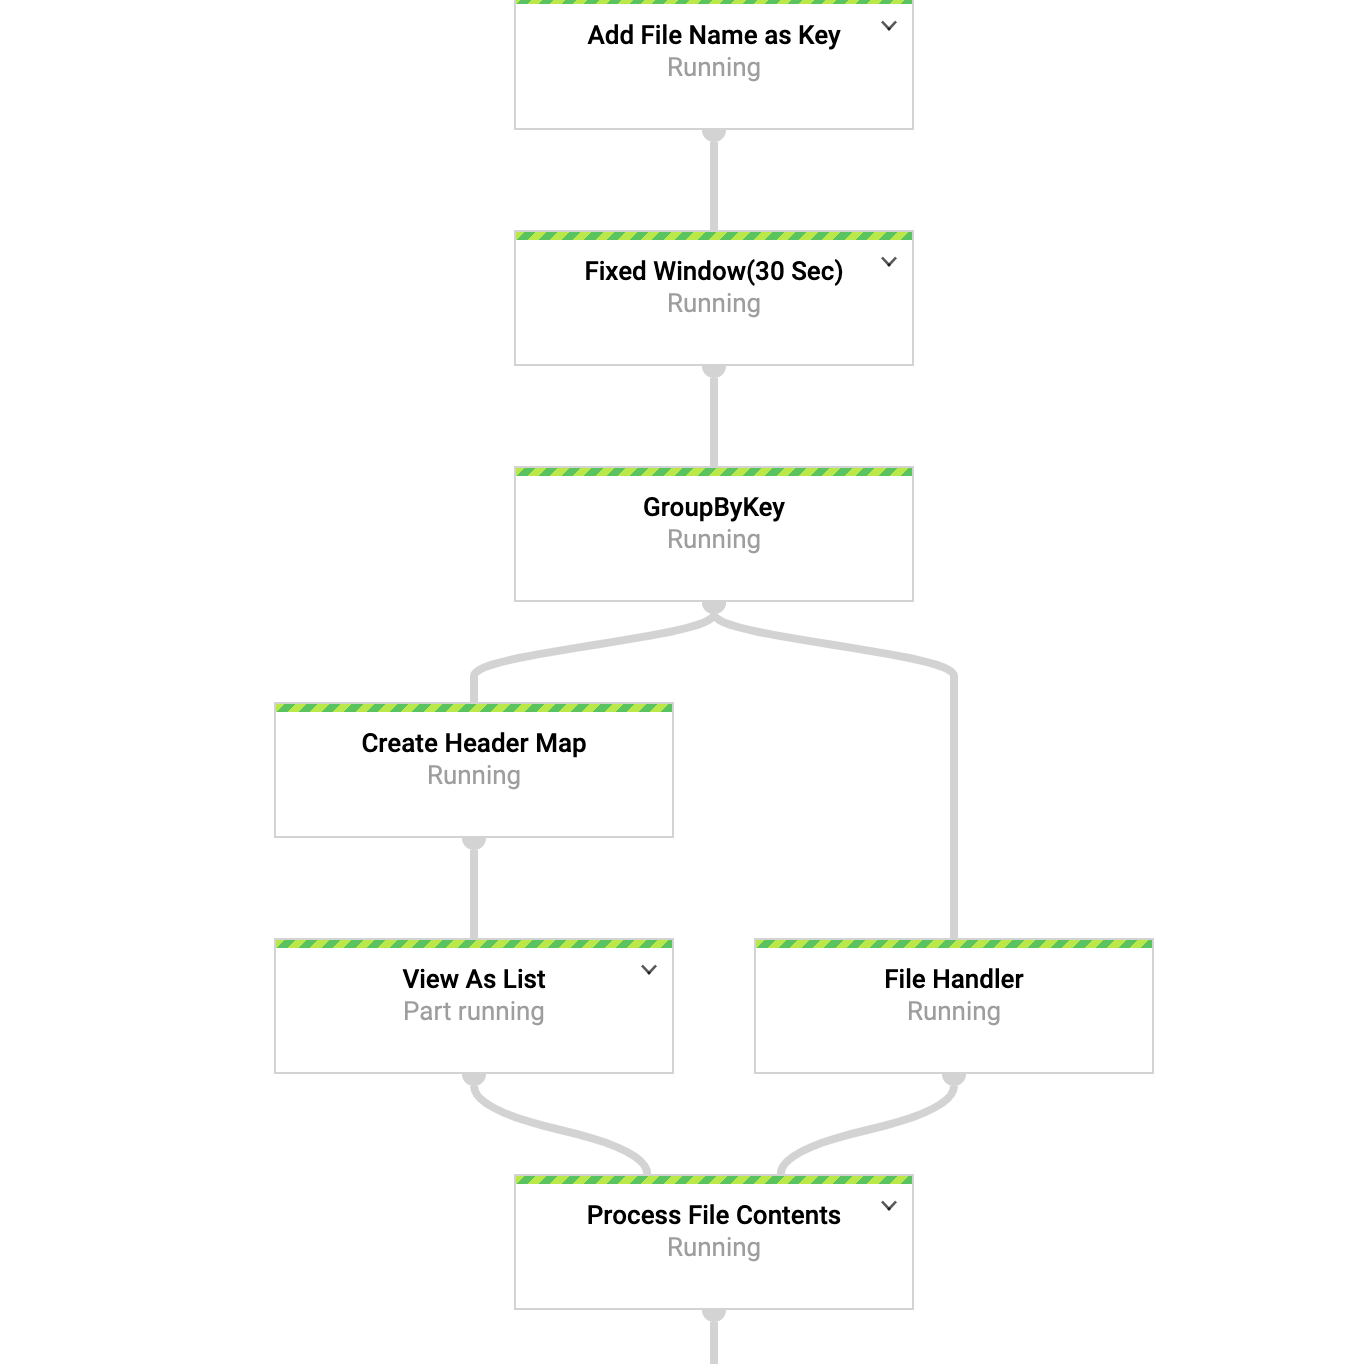 First half of the job details workflow.